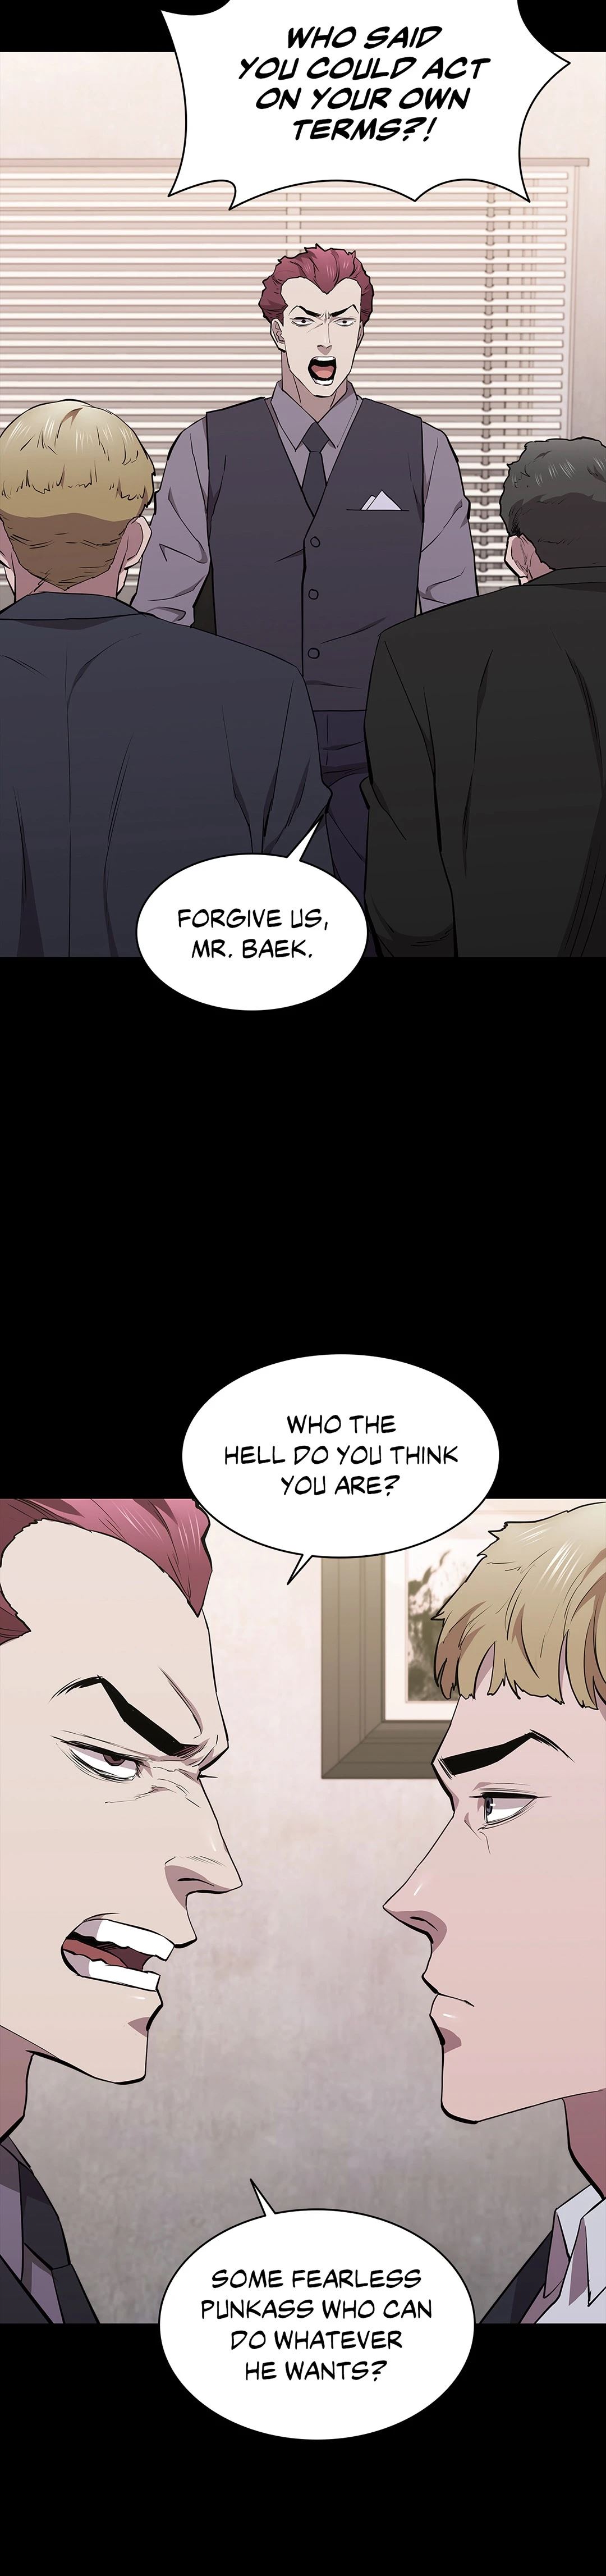 Thorns on Innocence - Chapter 31 Page 2